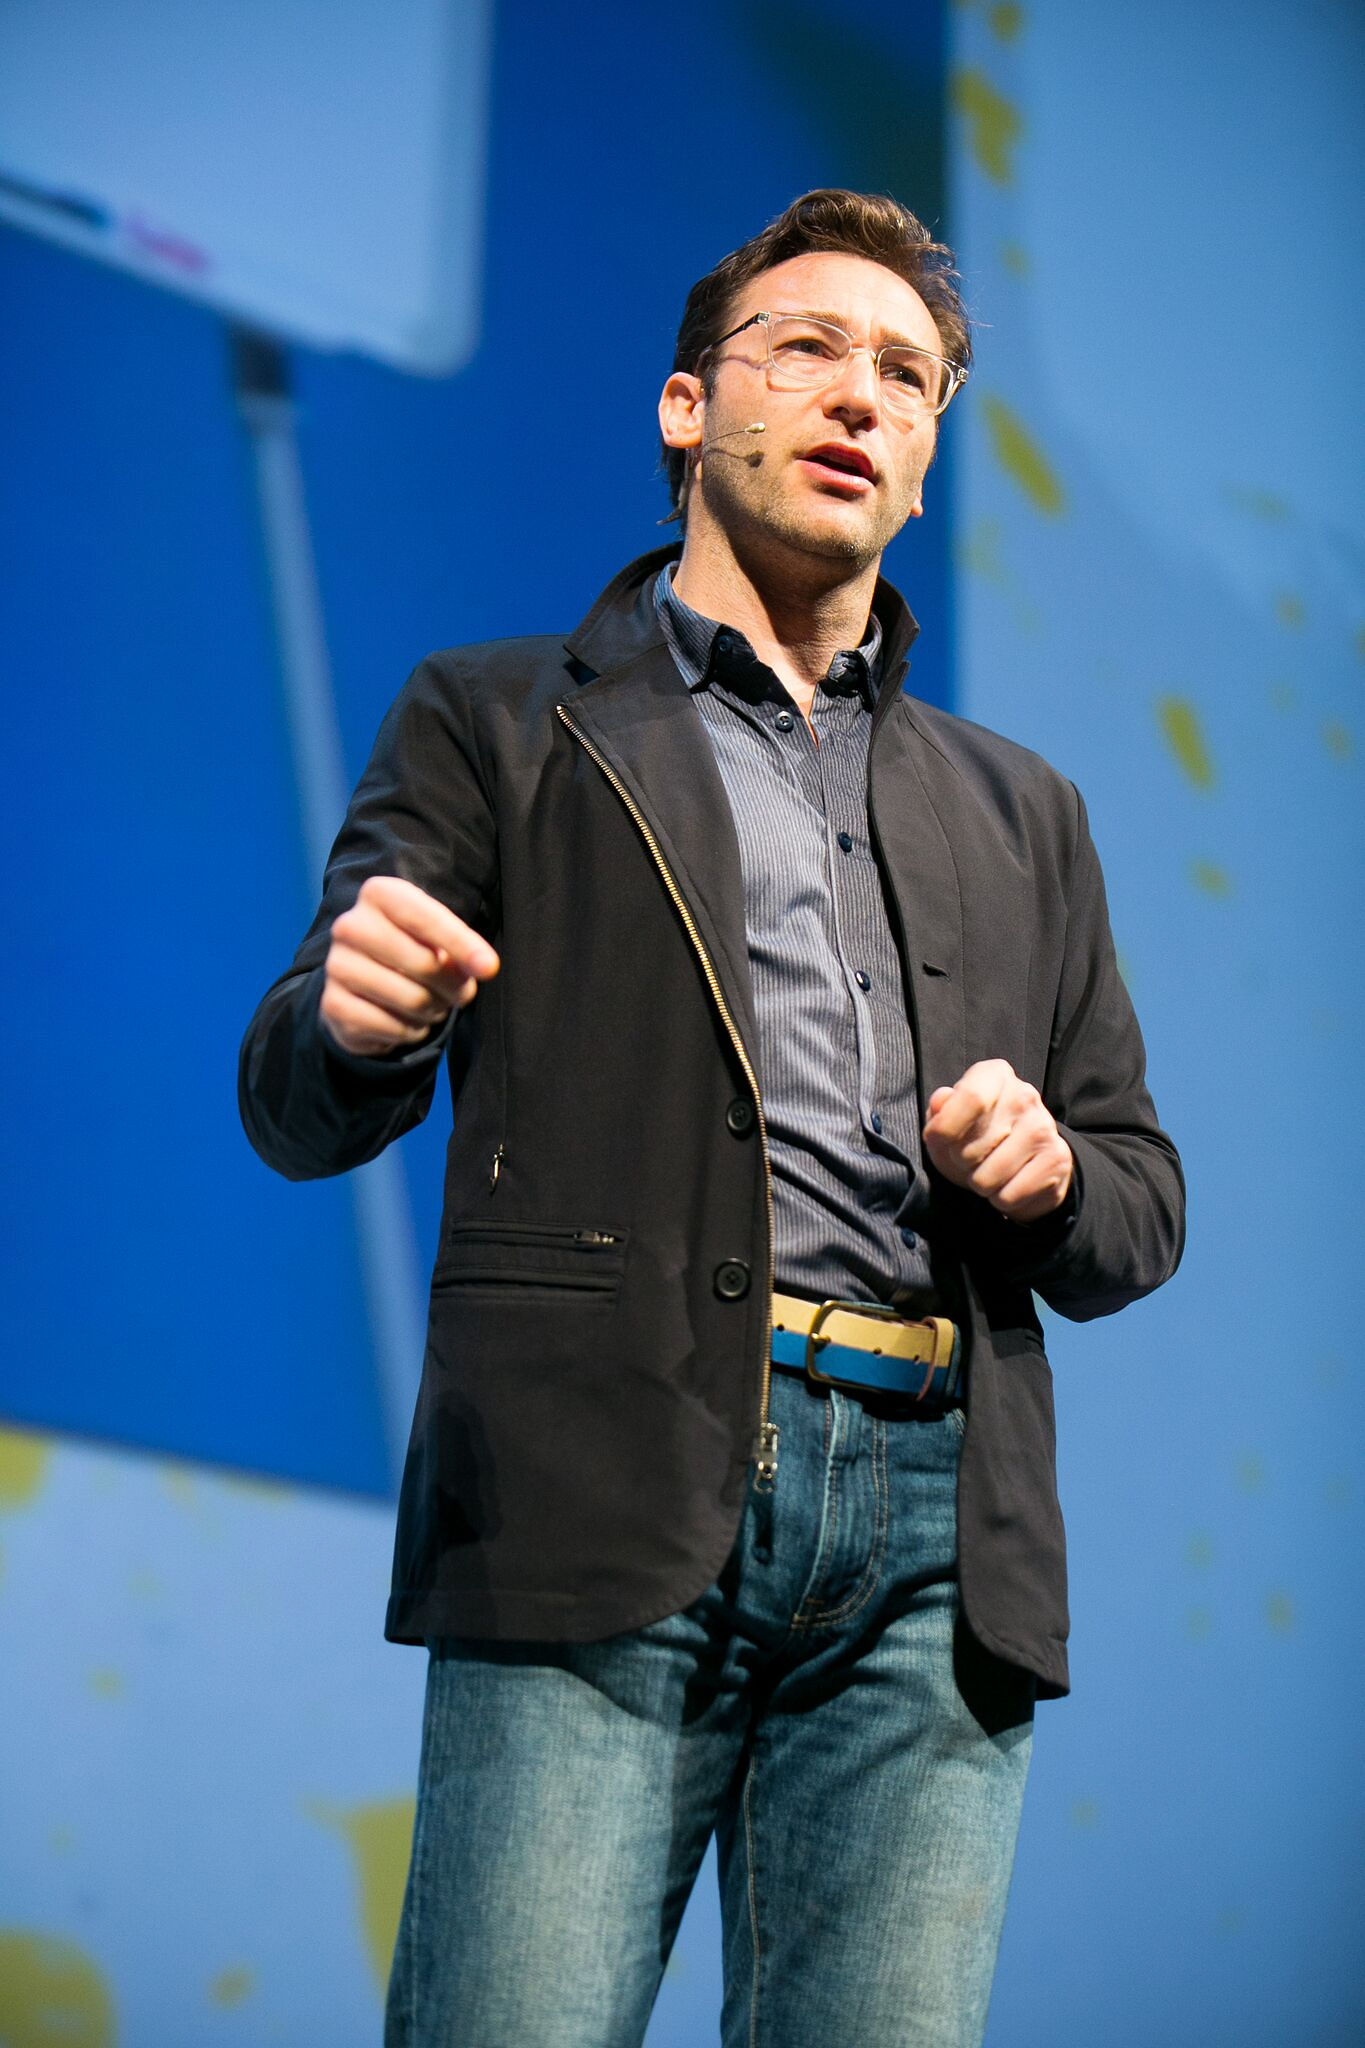 Simon Sinek on stage speaking about The Infinite Game